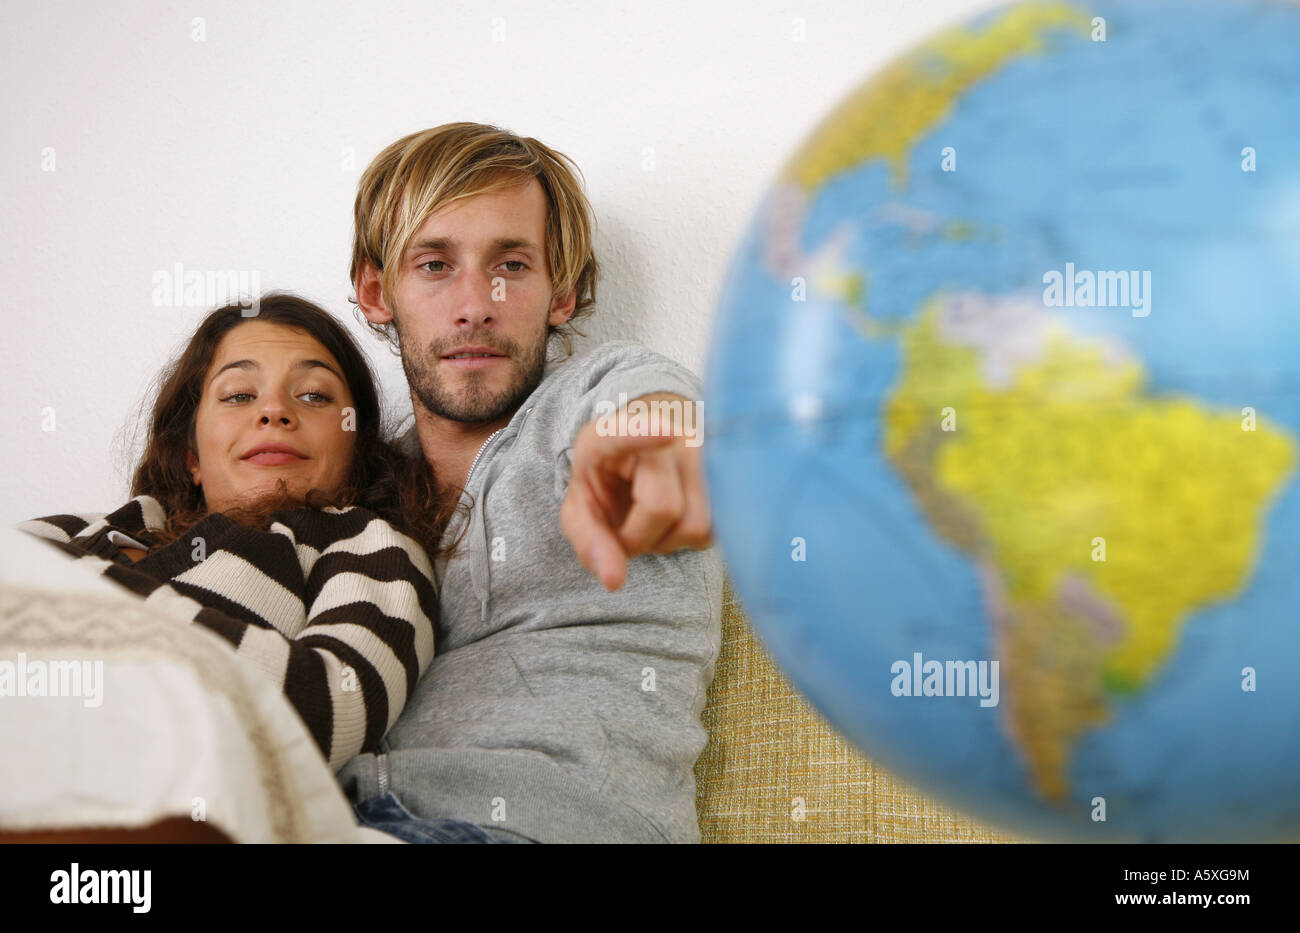 Young couple on couch man pointing at globe Stock Photo